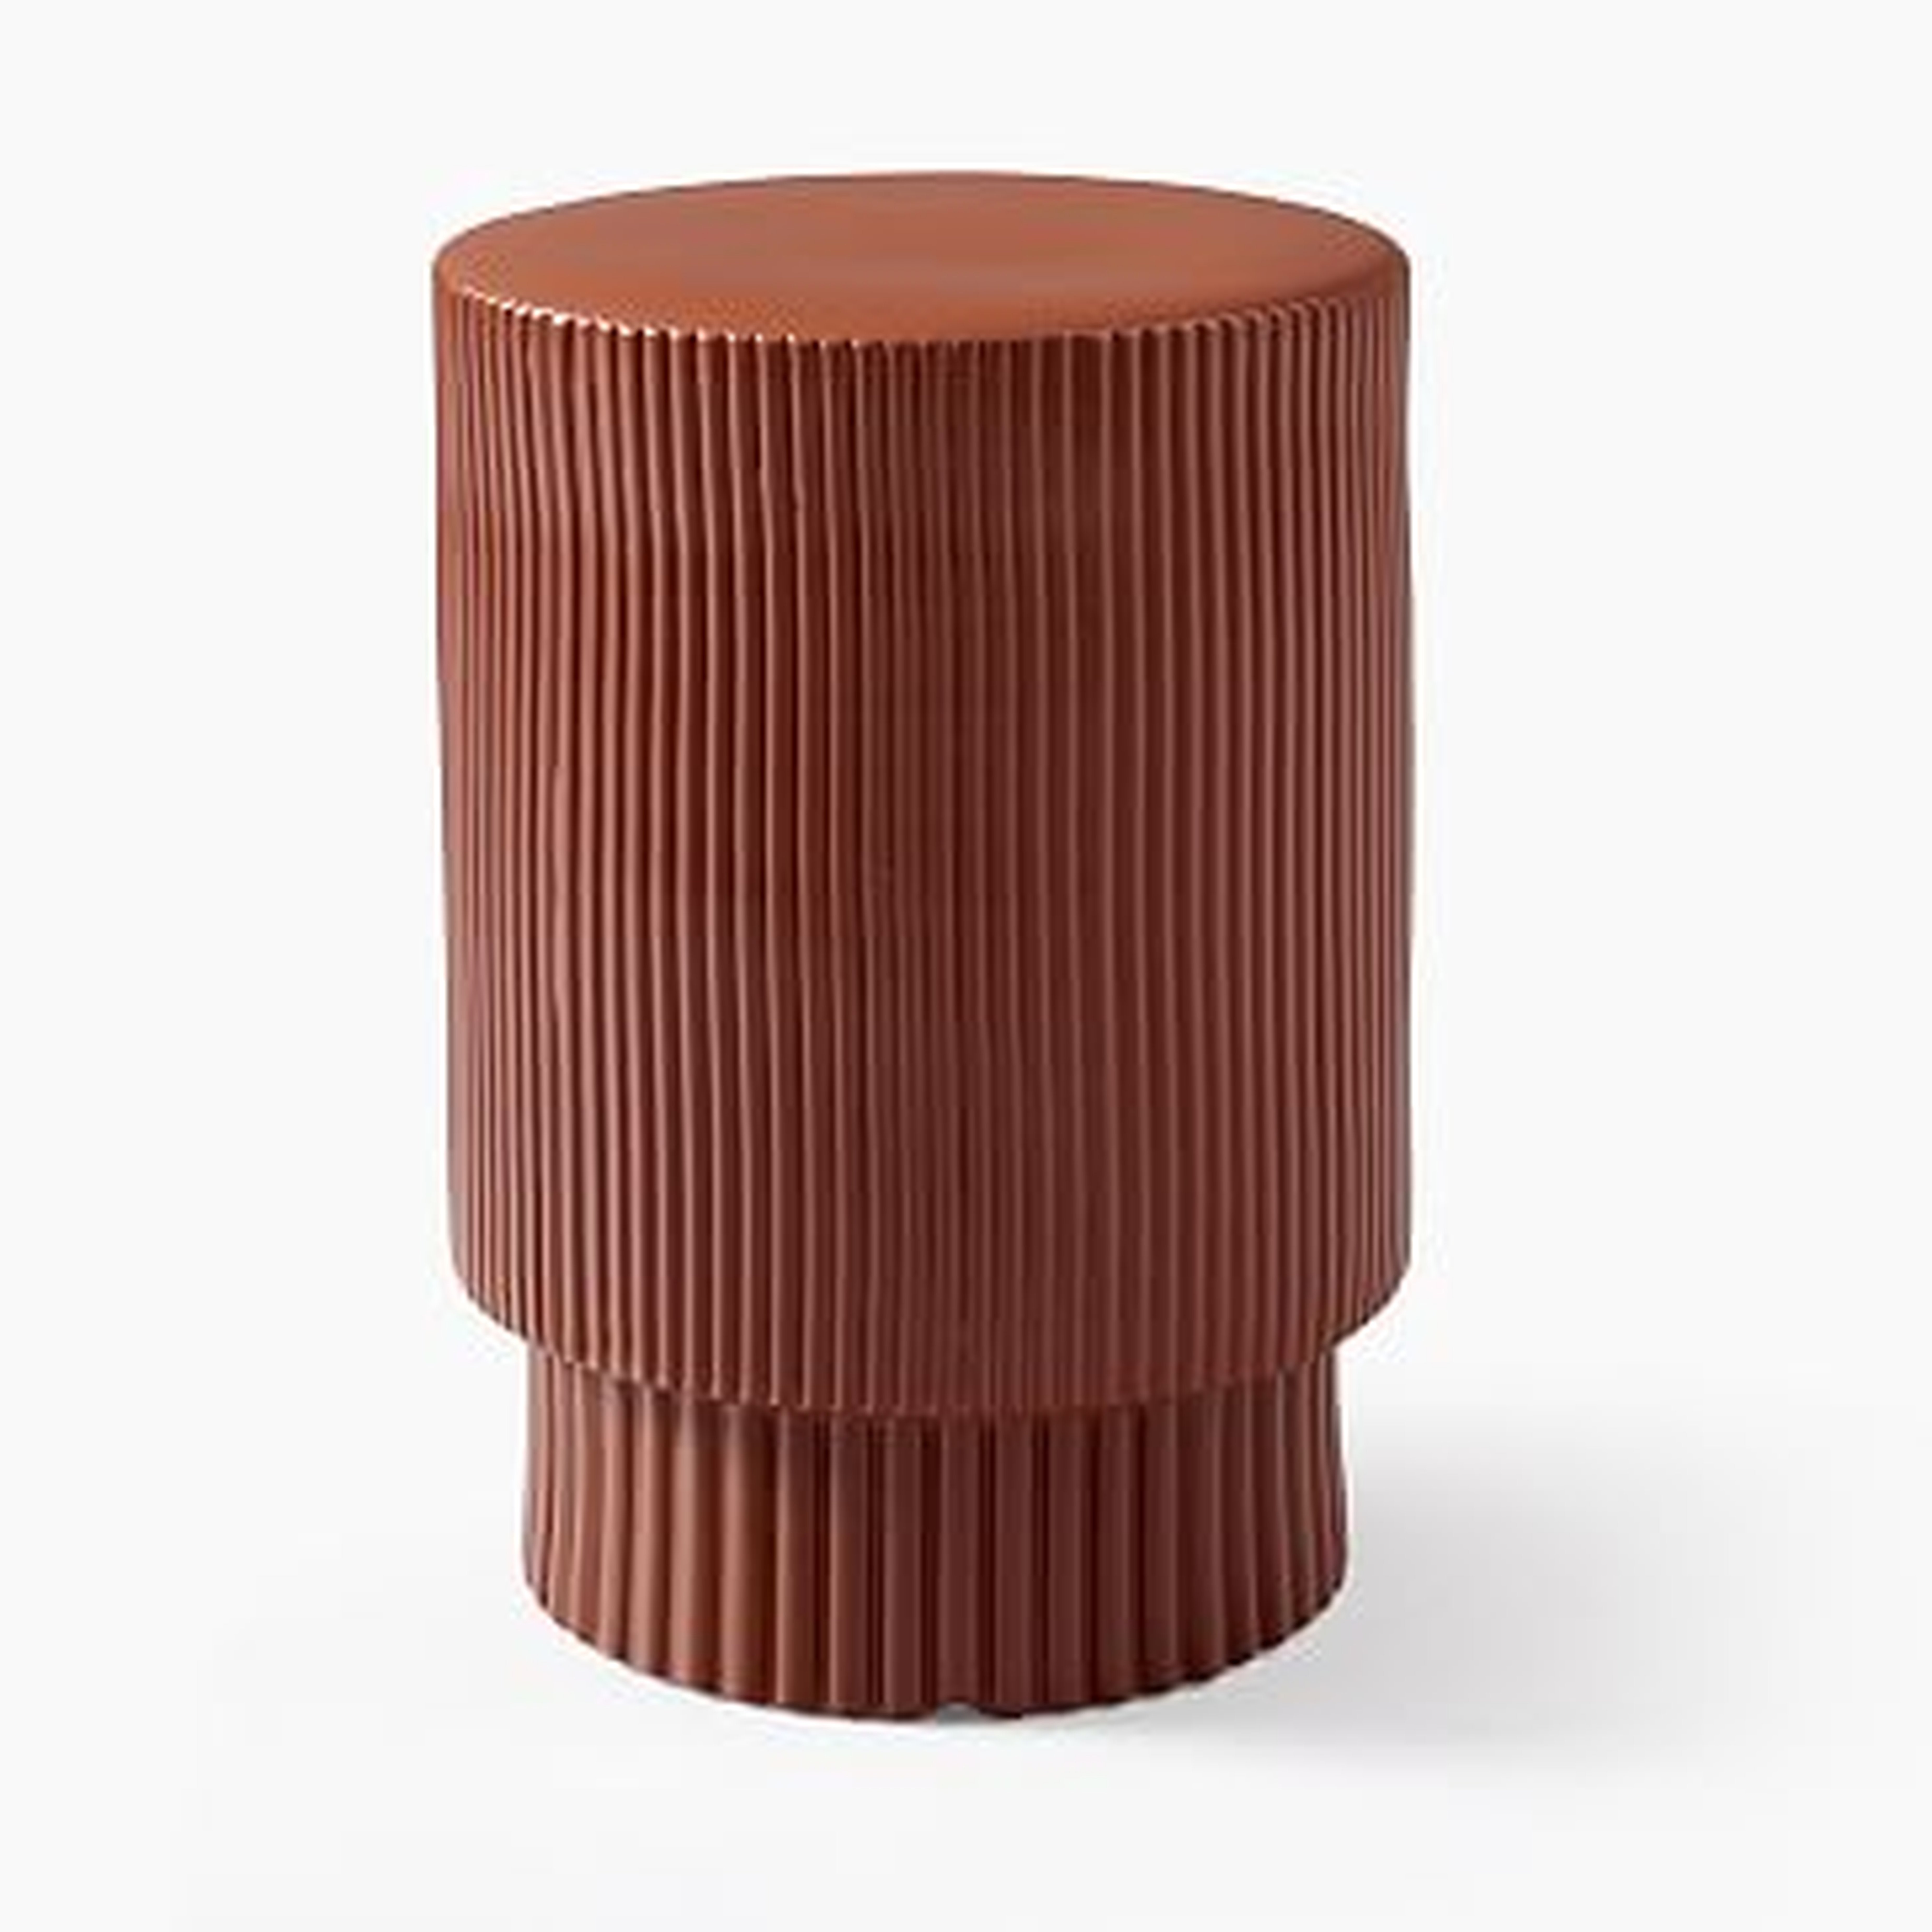 Textured Collection Side Table, Terracotta - West Elm